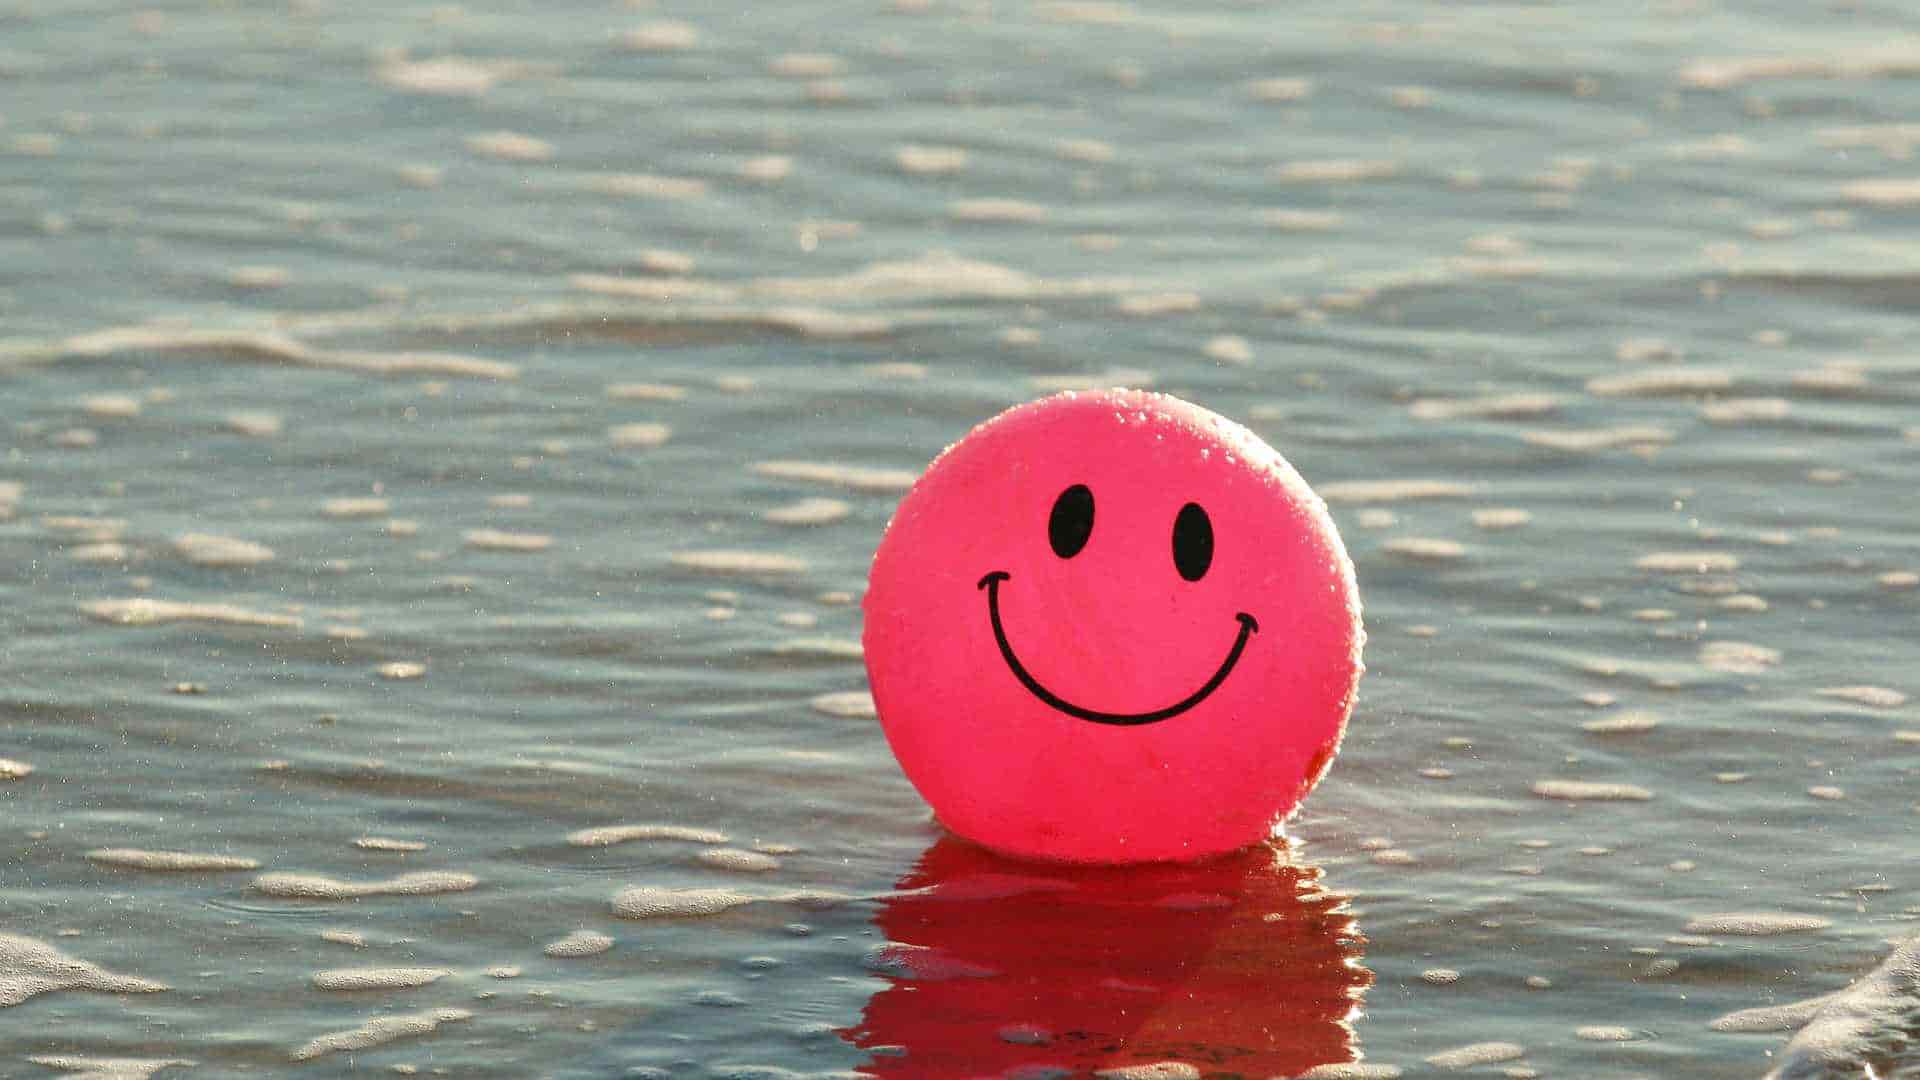 Ball with happy face drawn on it in water